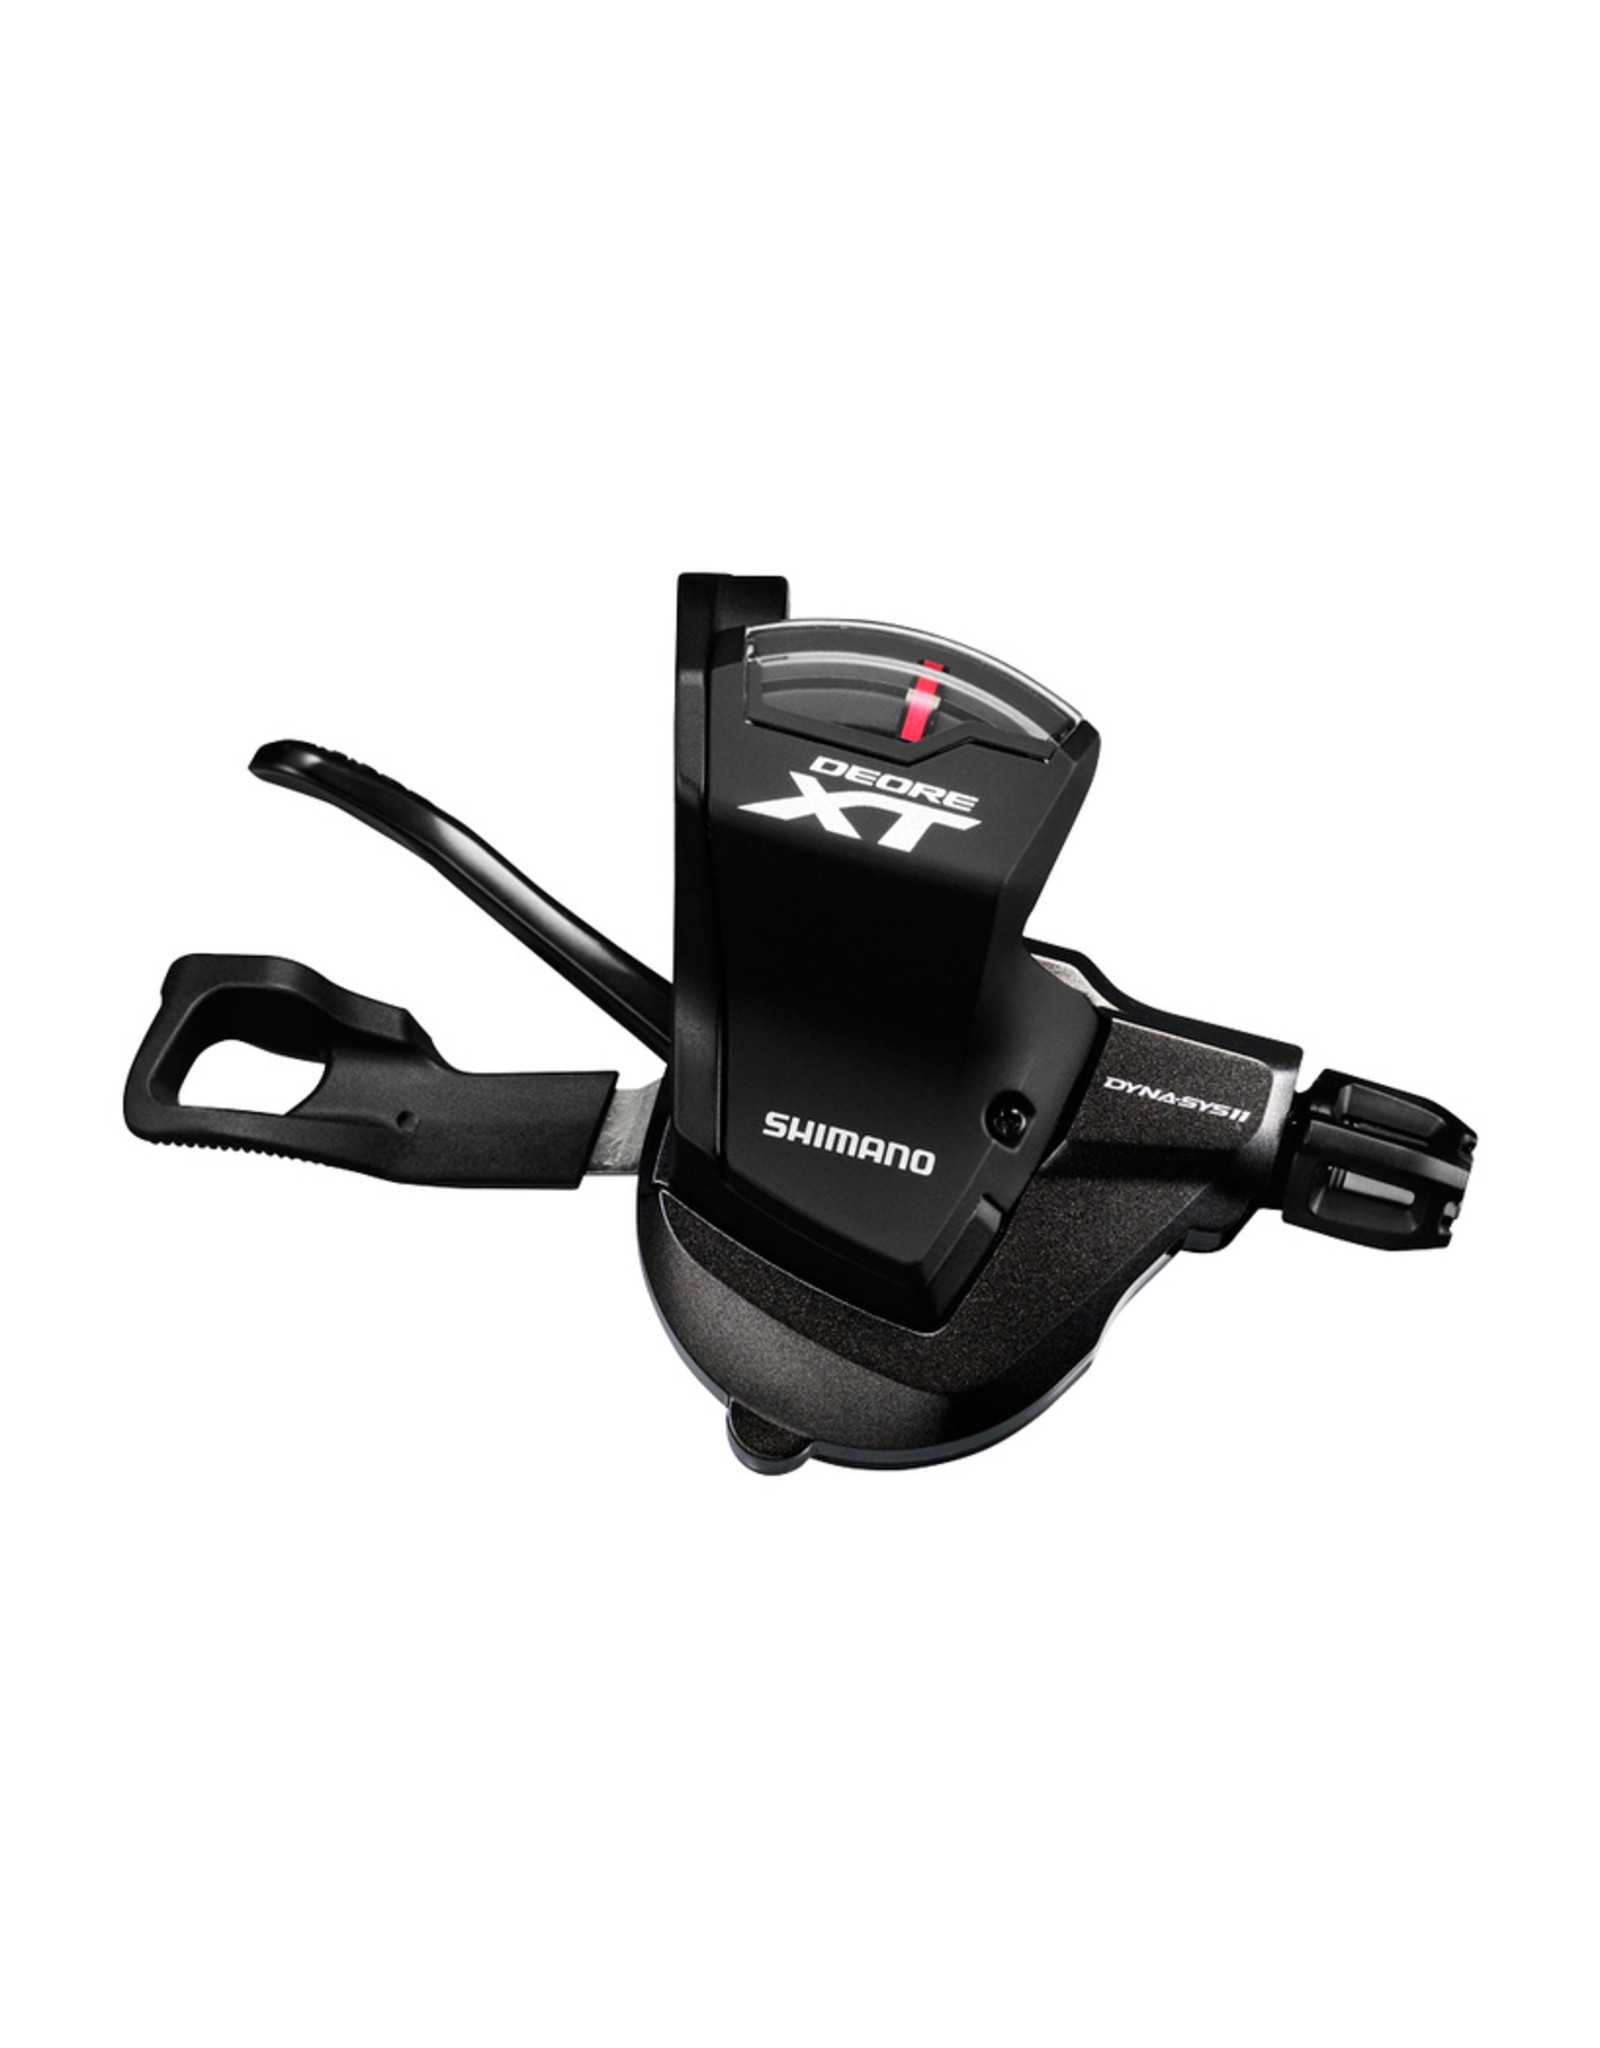 SHIMANO Shimano Shift Lever SL-M8000 Deore-XT Right:11-Spd W/ Optical Gear Display W/Base Cap  2050mm Inner Black Sp 41 Sealed Outer(1880mm) Add 6mm Sealed Cap X3 and Nose Cap X1